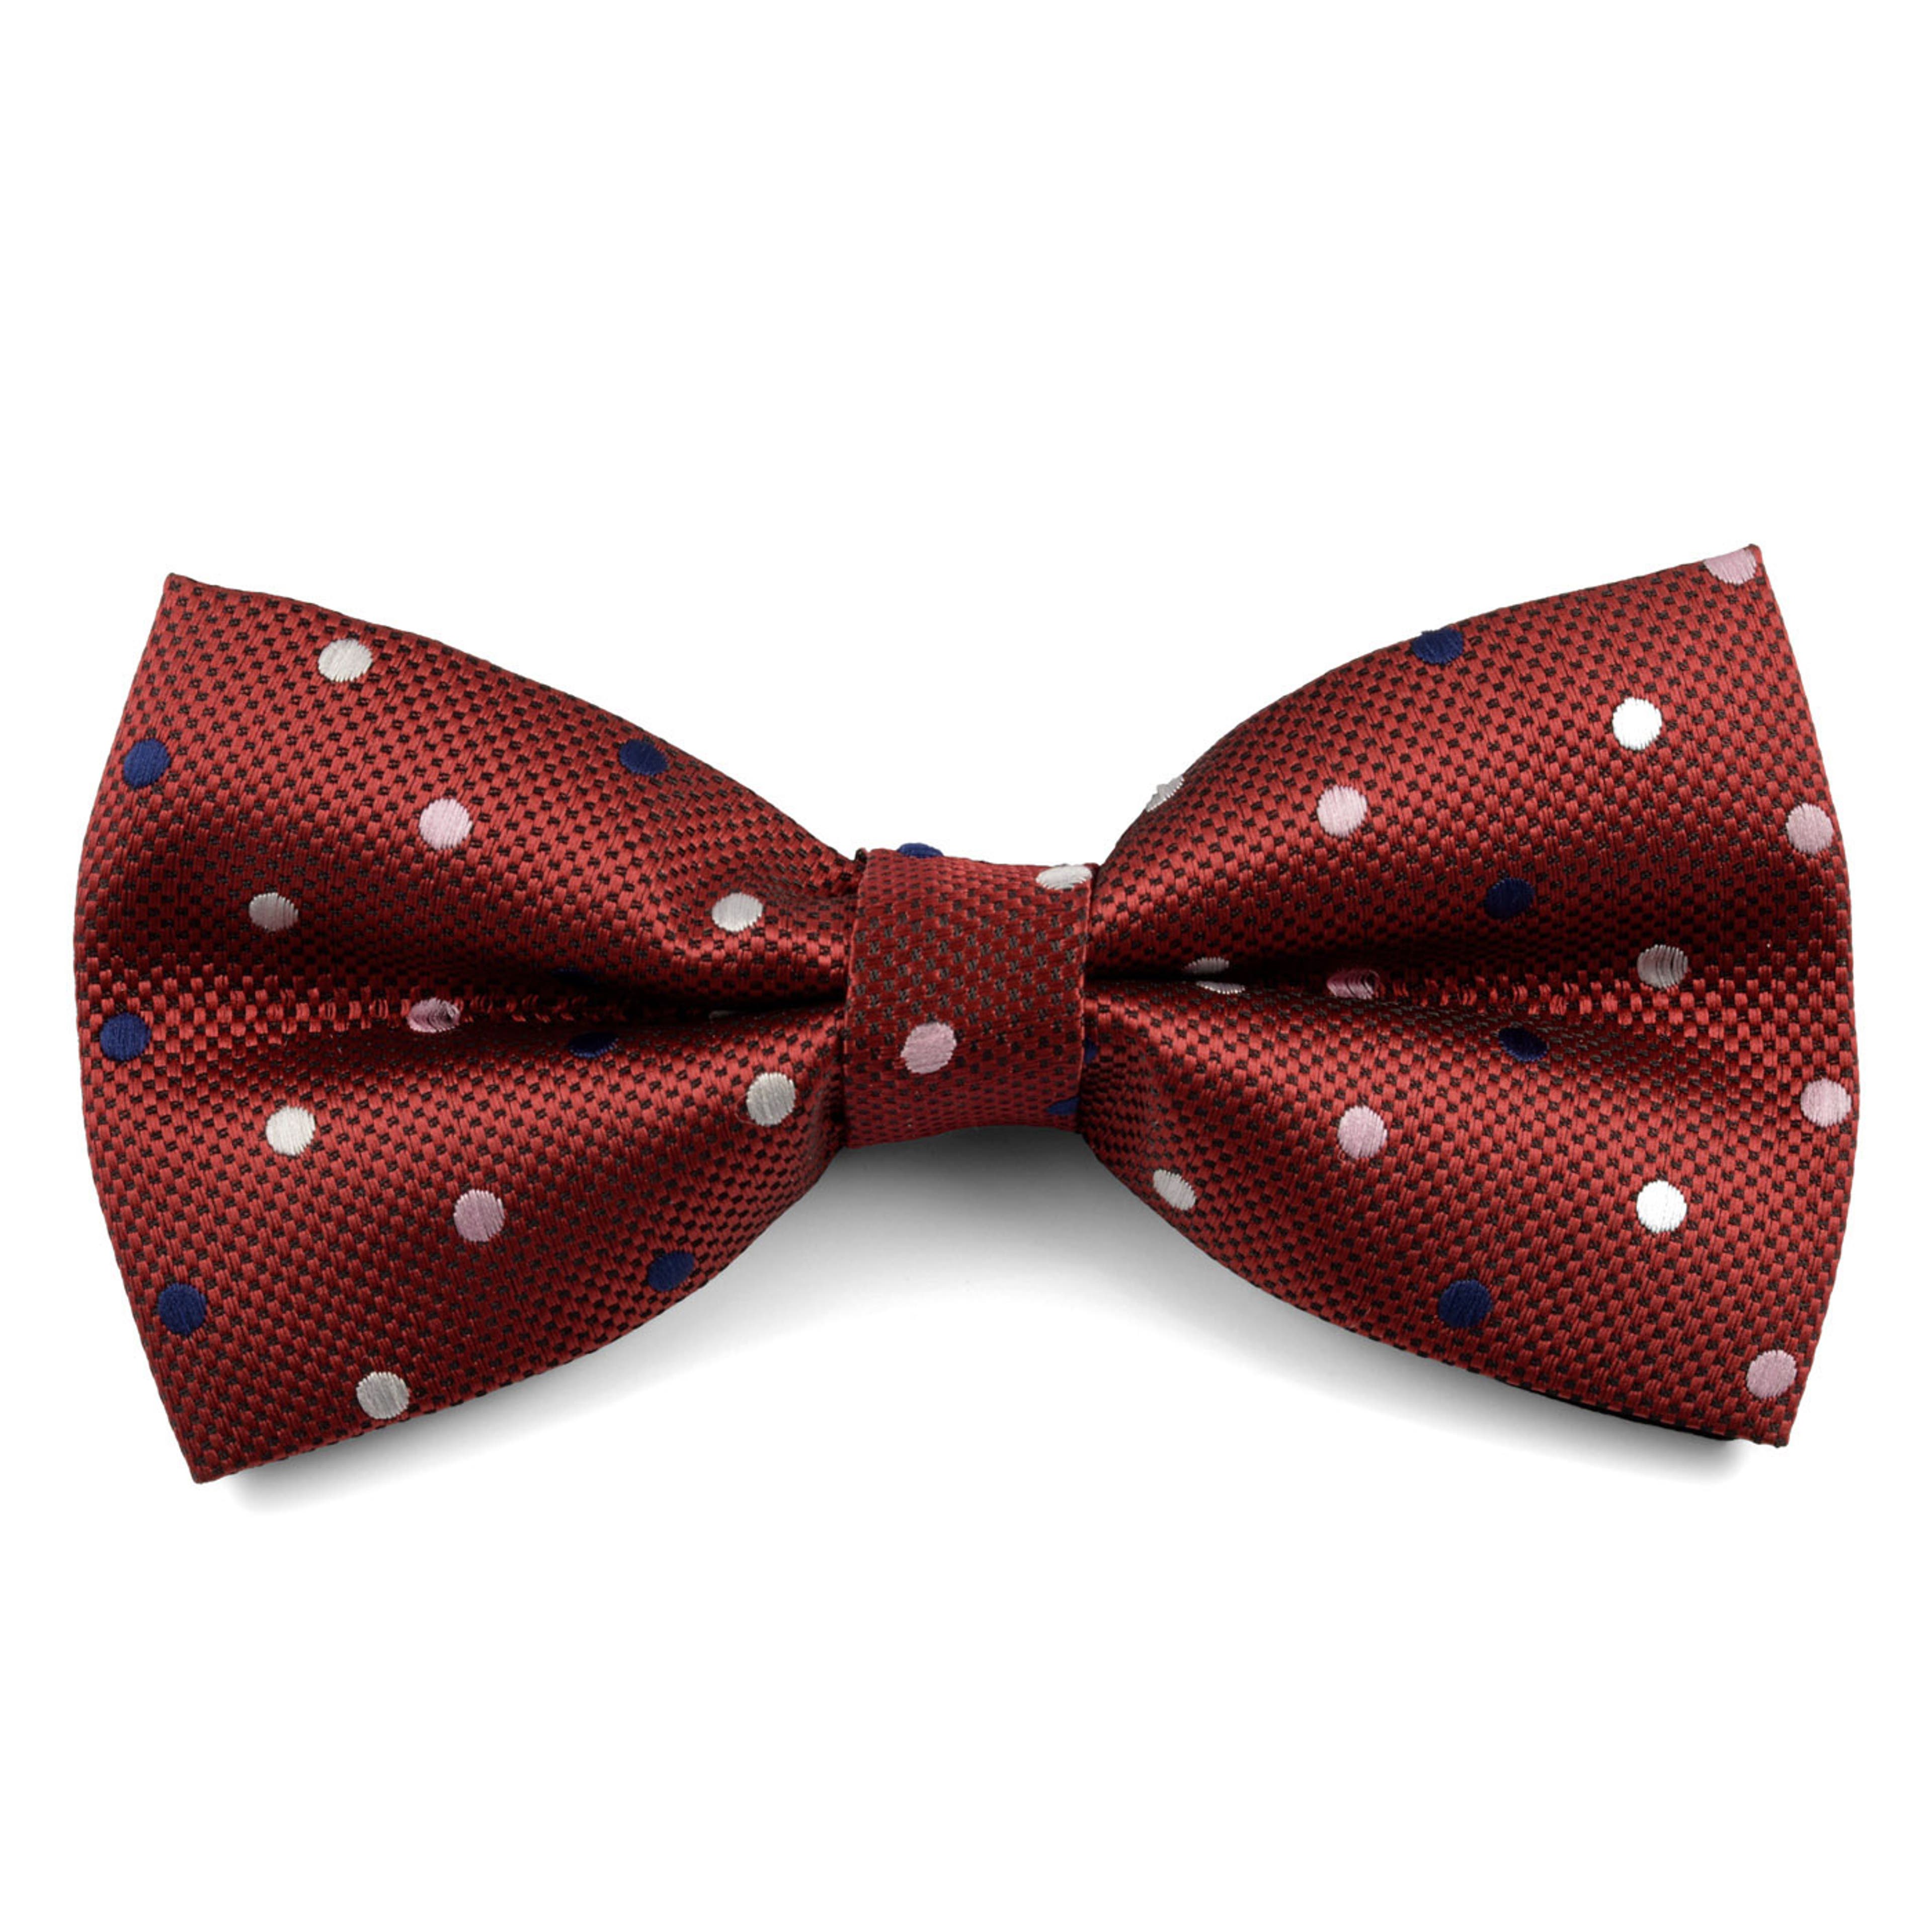 Burgundy & White Dotted Pre-Tied Bow Tie